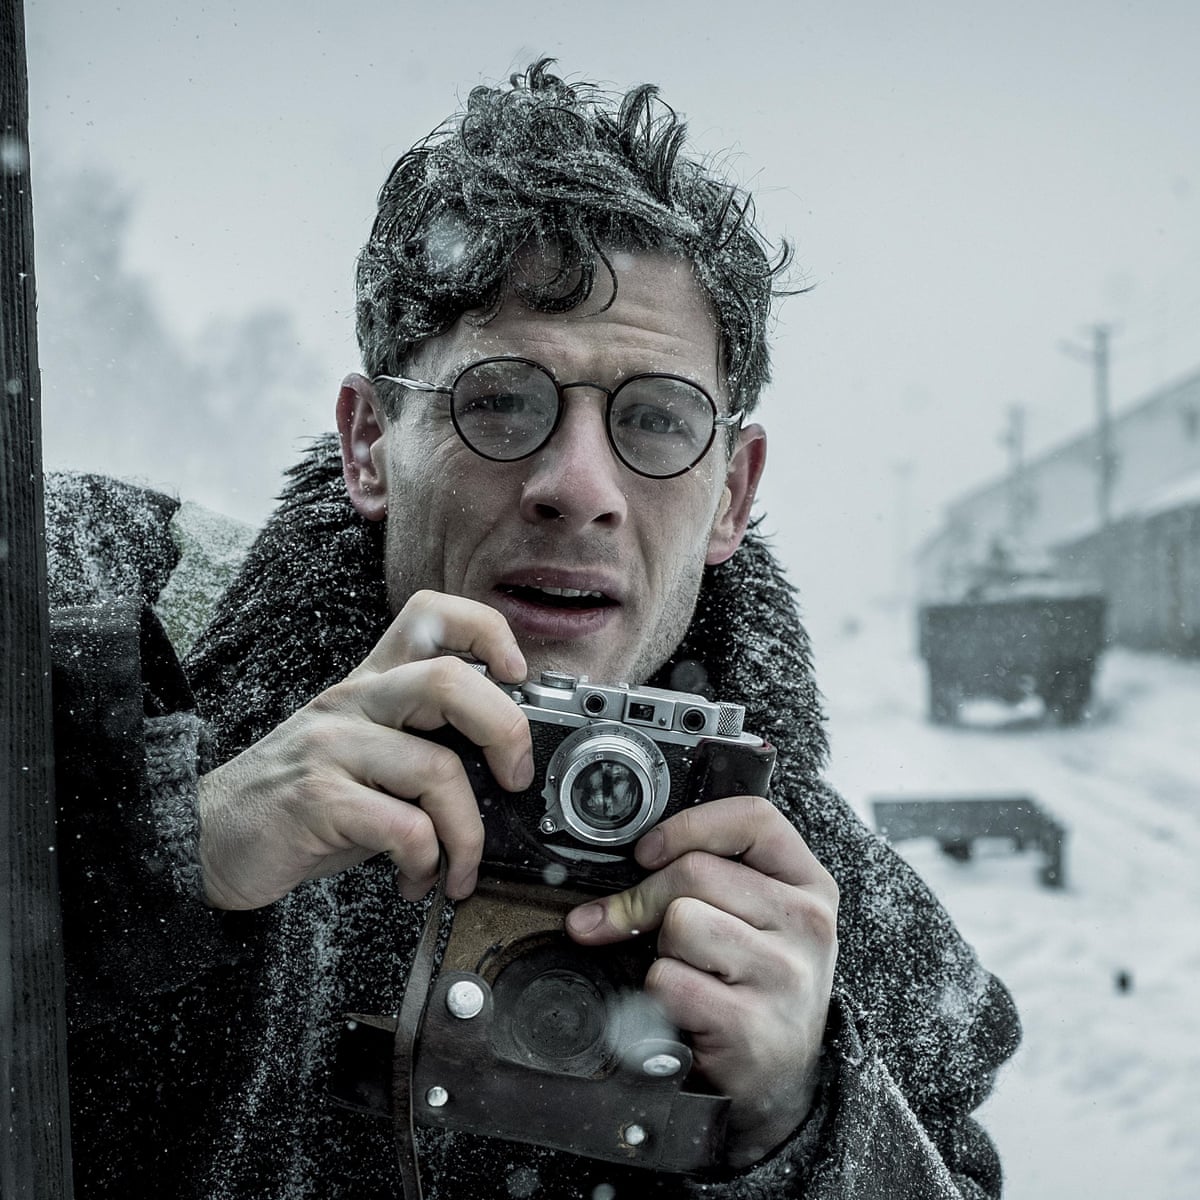 #Bales2024FilmChallenge

May 3 | freedom of the press movie

Mr. Jones (Agnieszka Holland, 2019)

Based on a true story, Gareth Jones is a young Welsh journalist who risks his life to uncover the truth about the devastating famine in Ukraine in the 1930s (the Holodomor).